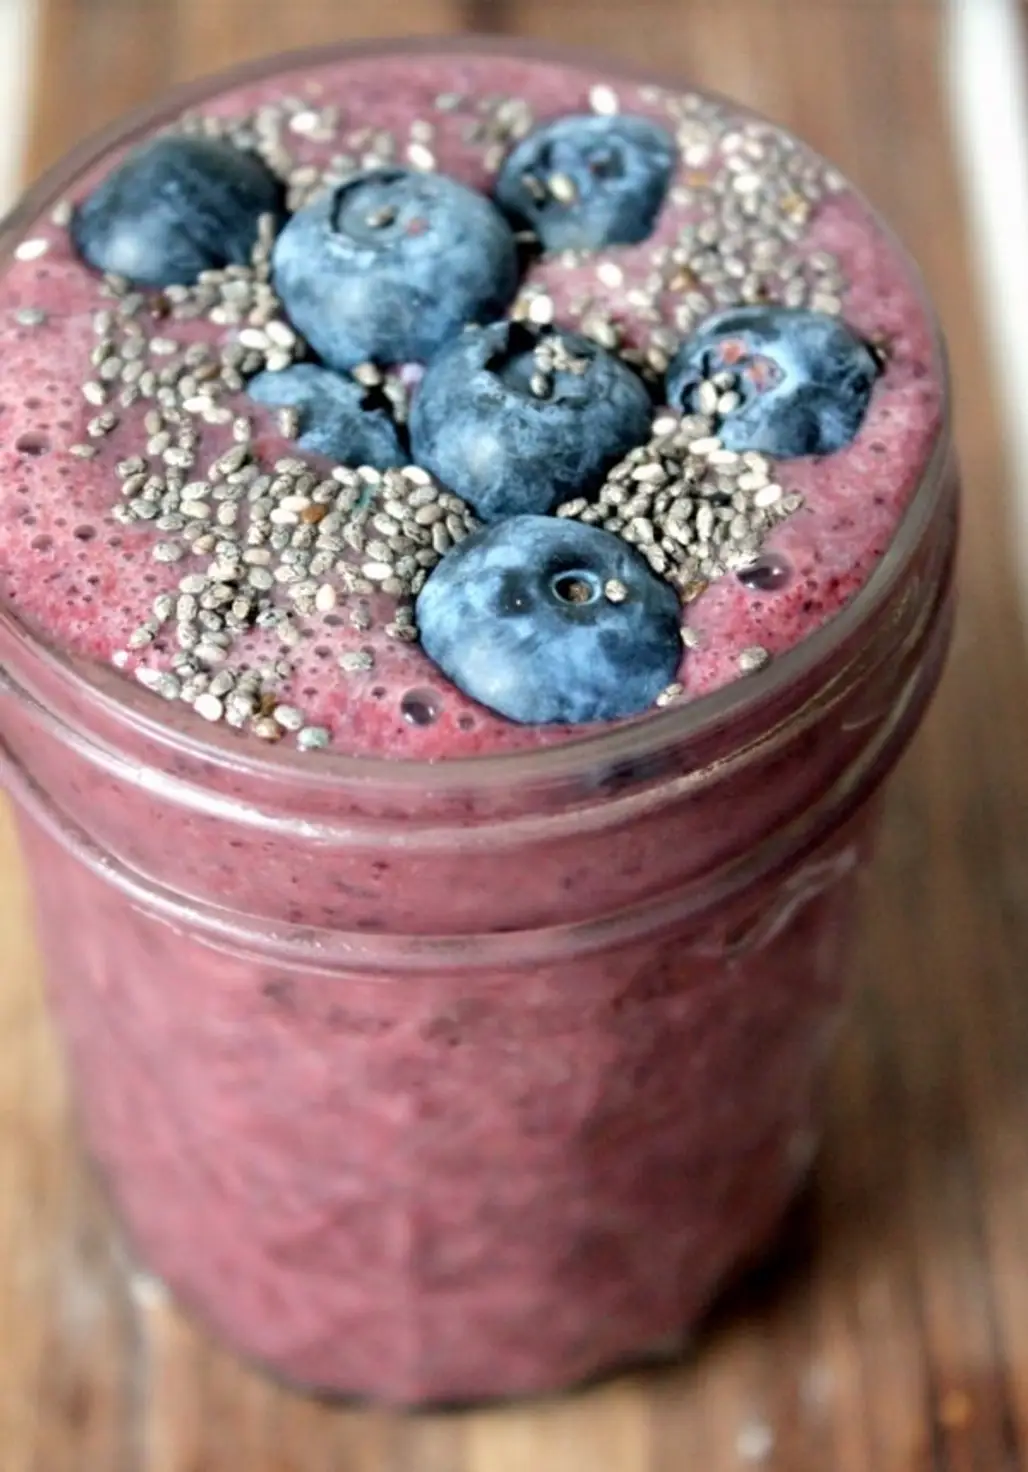 Blueberry, Banana, and Spinach